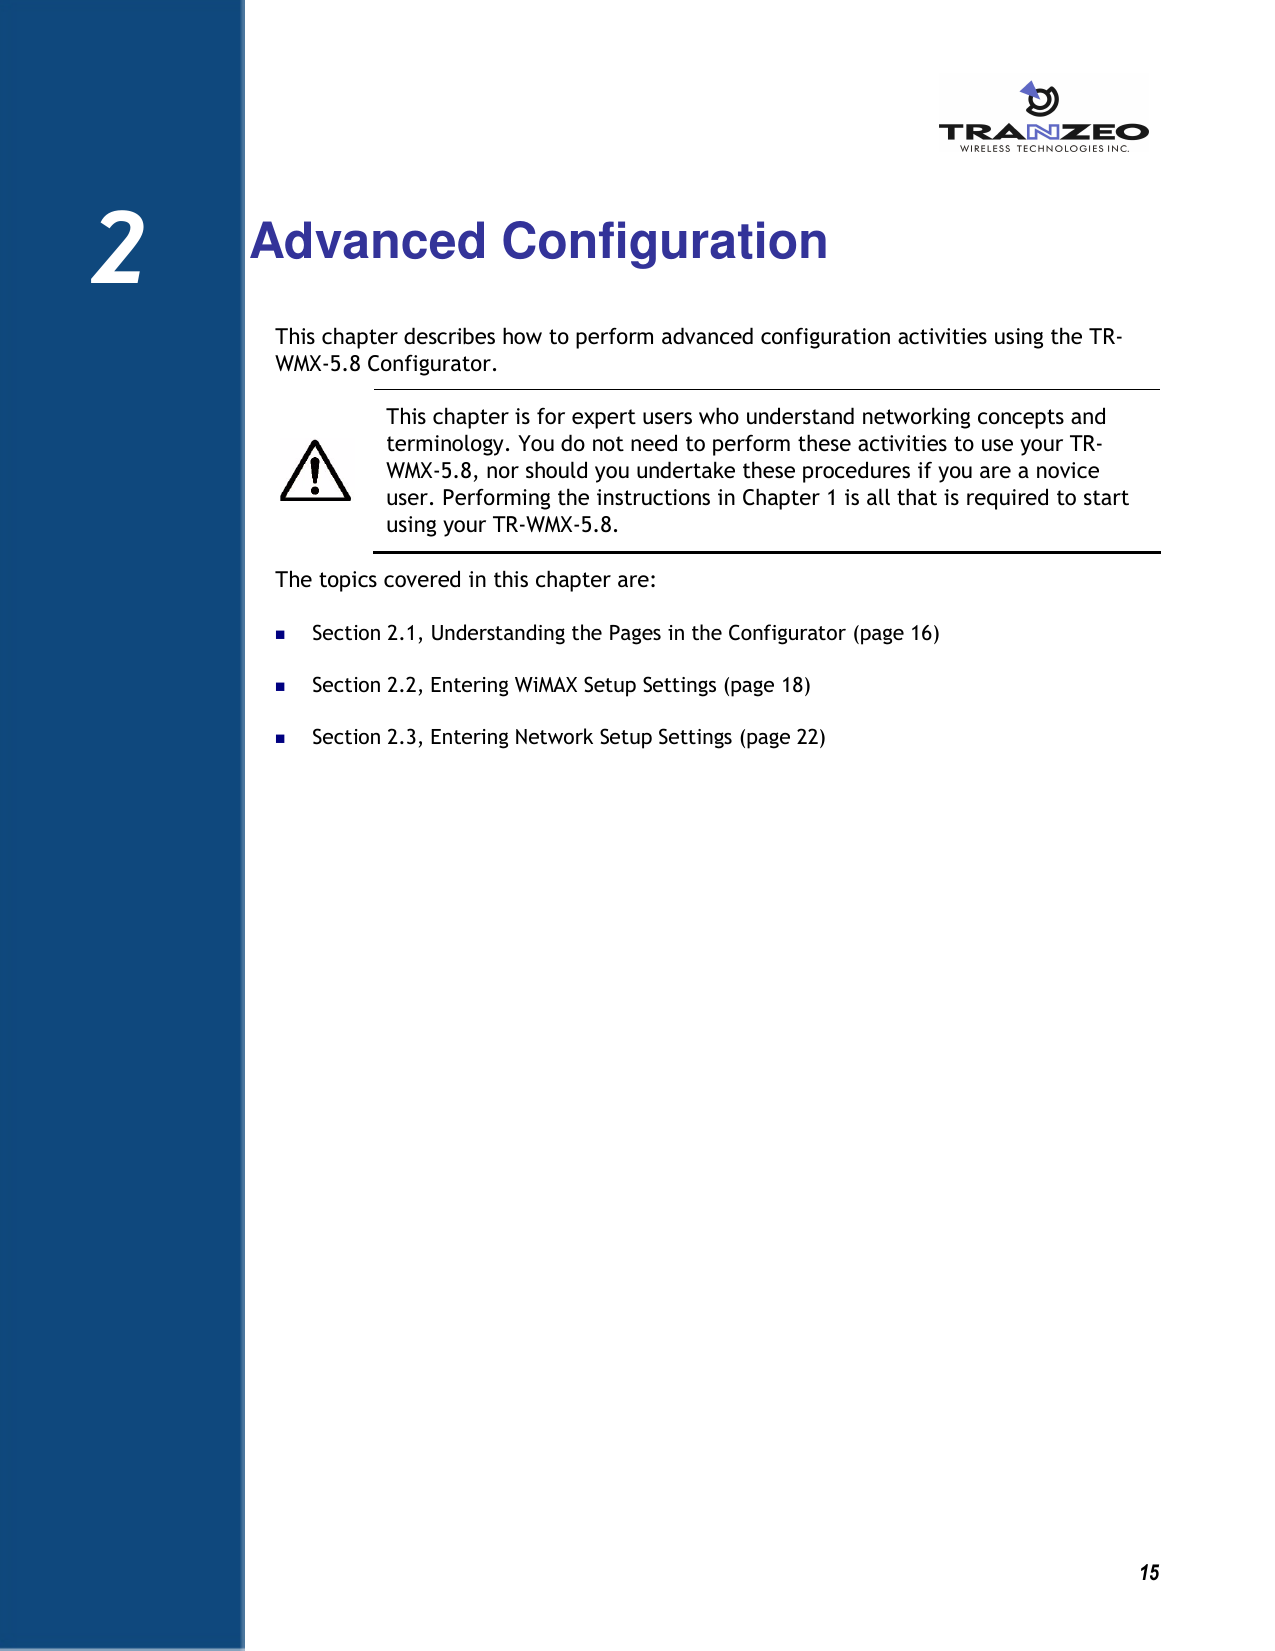   15  2  Advanced Configuration This chapter describes how to perform advanced configuration activities using the TR-WMX-5.8 Configurator.    This chapter is for expert users who understand networking concepts and terminology. You do not need to perform these activities to use your TR-WMX-5.8, nor should you undertake these procedures if you are a novice user. Performing the instructions in Chapter 1 is all that is required to start using your TR-WMX-5.8. The topics covered in this chapter are:  Section 2.1, Understanding the Pages in the Configurator (page 16)  Section 2.2, Entering WiMAX Setup Settings (page 18)  Section 2.3, Entering Network Setup Settings (page 22)   2 